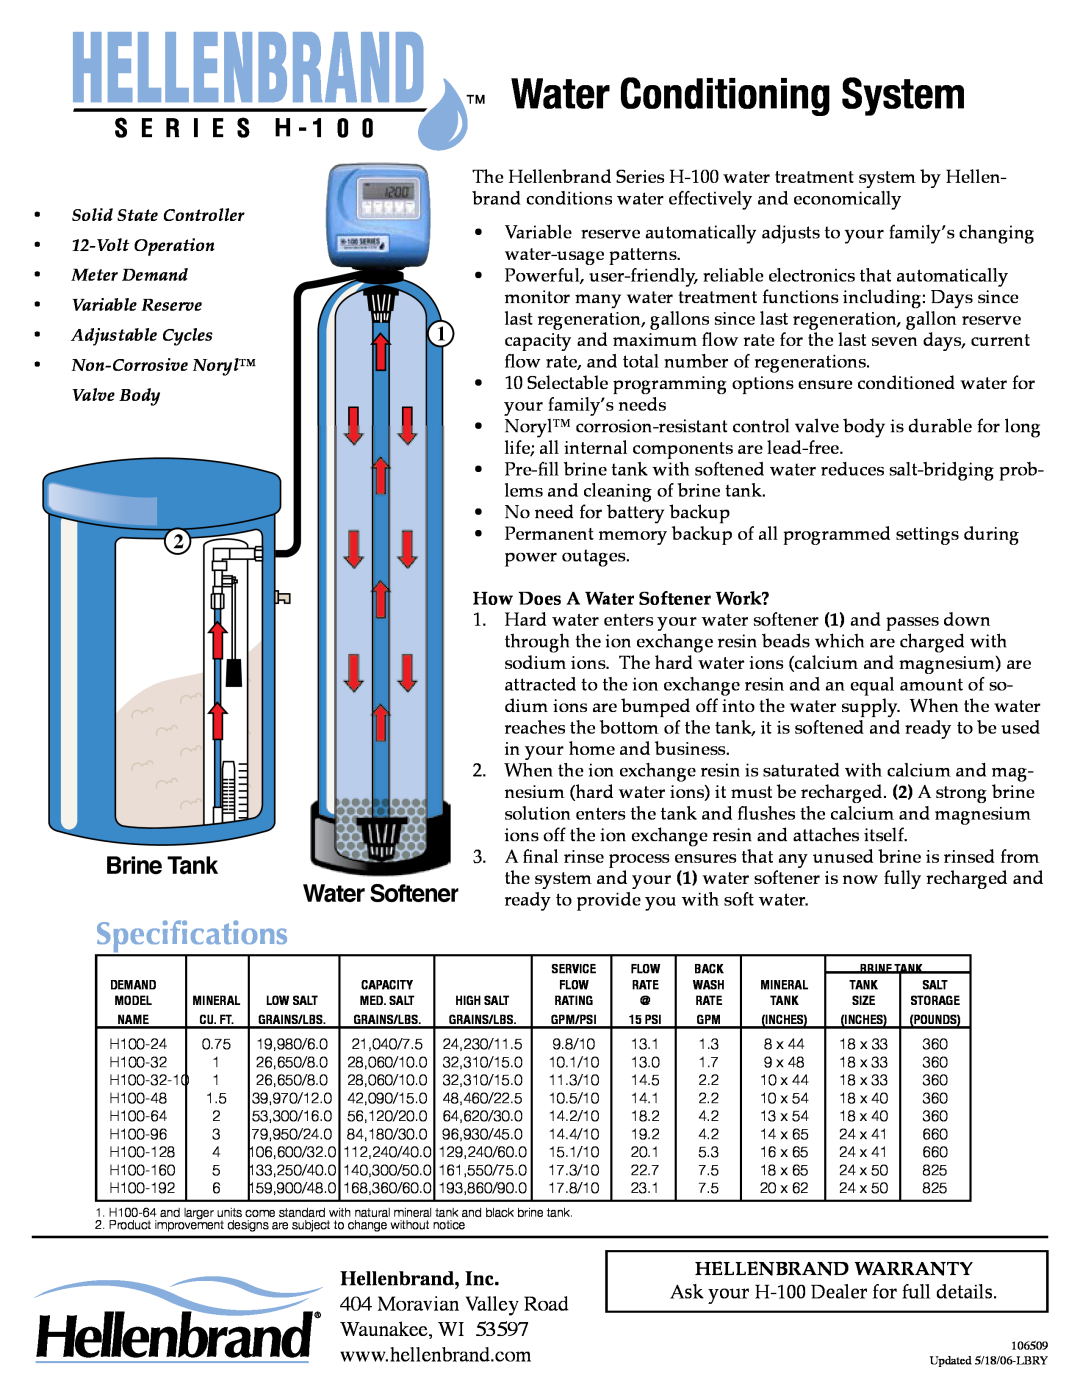 Argosy Research Series H-100 manual Water Conditioning System, Specifications, Brine Tank, Water Softener, Hellenbrand, Inc 